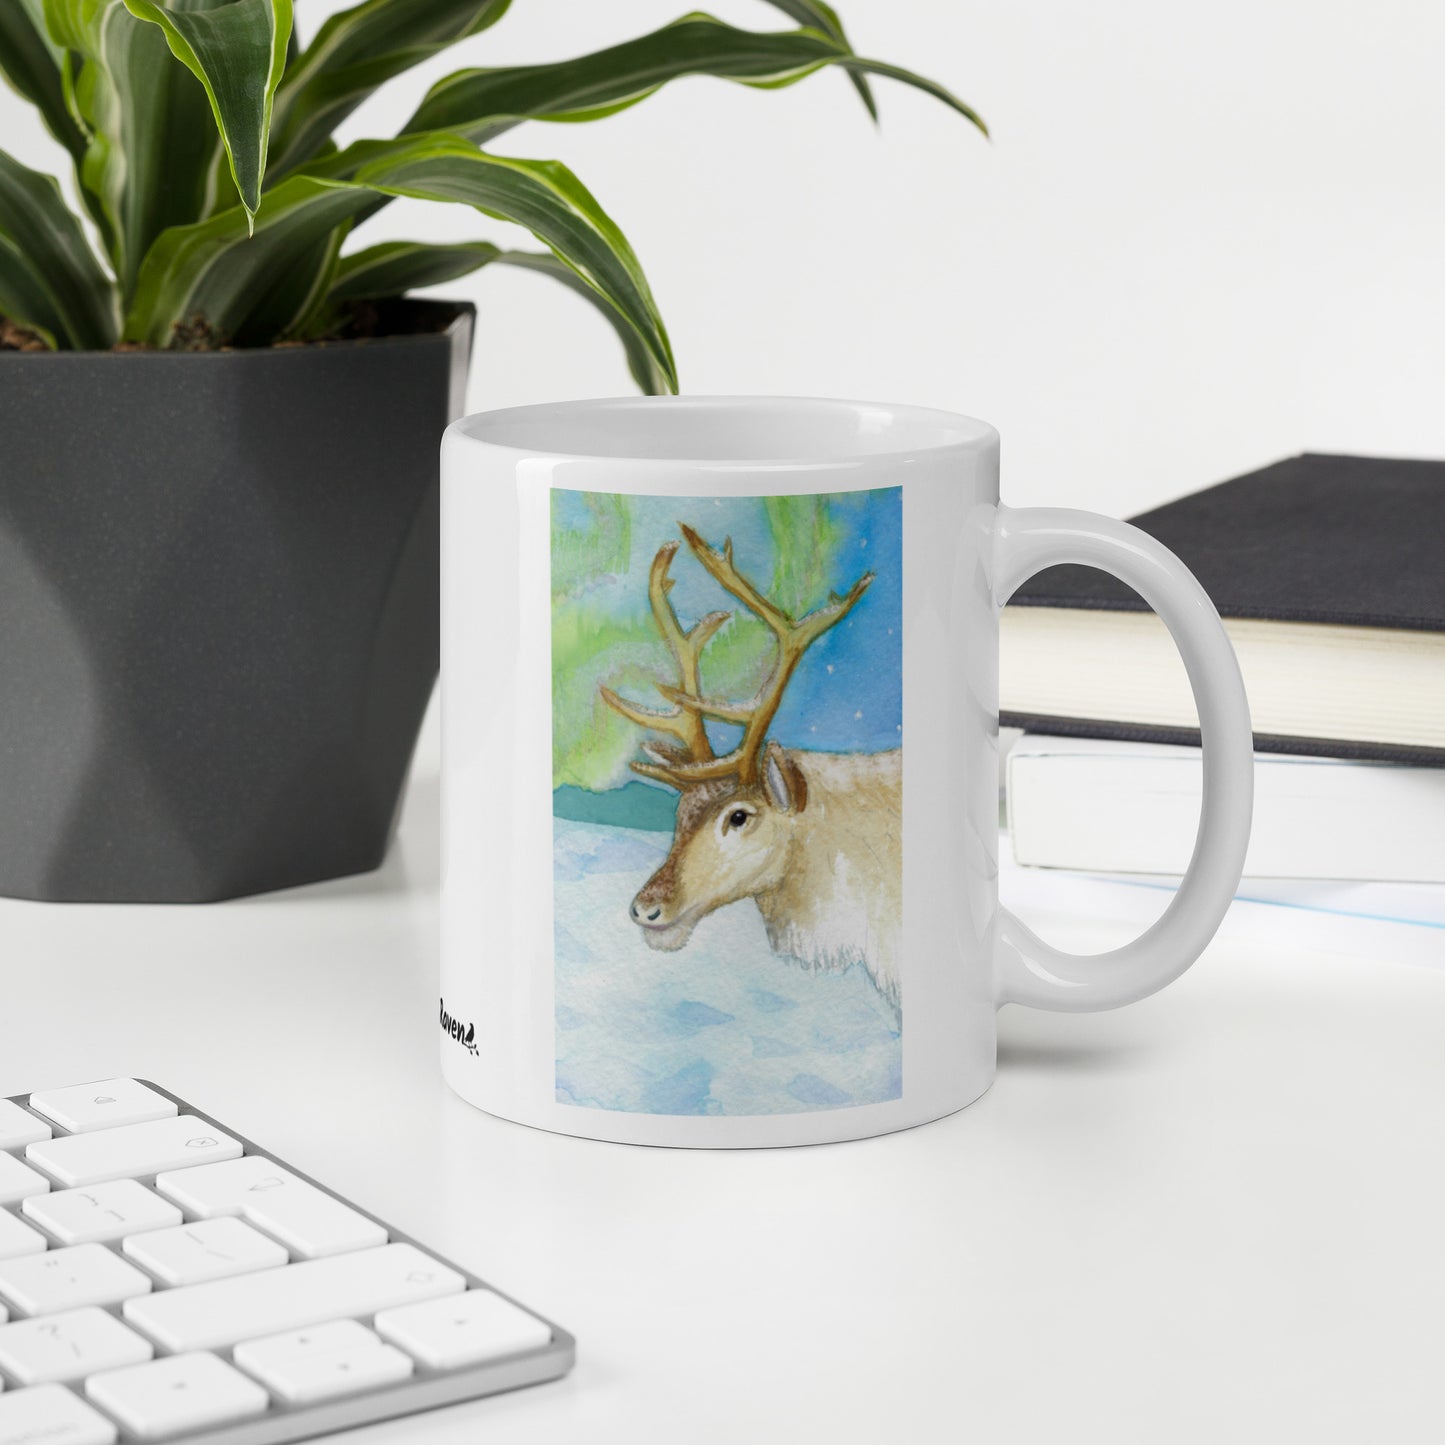 11 ounce ceramic mug featuring Northern Lights reindeer design. Double-sided print. Dishwasher and microwave safe. Shown on a desk by a keyboard, books, and potted plant.